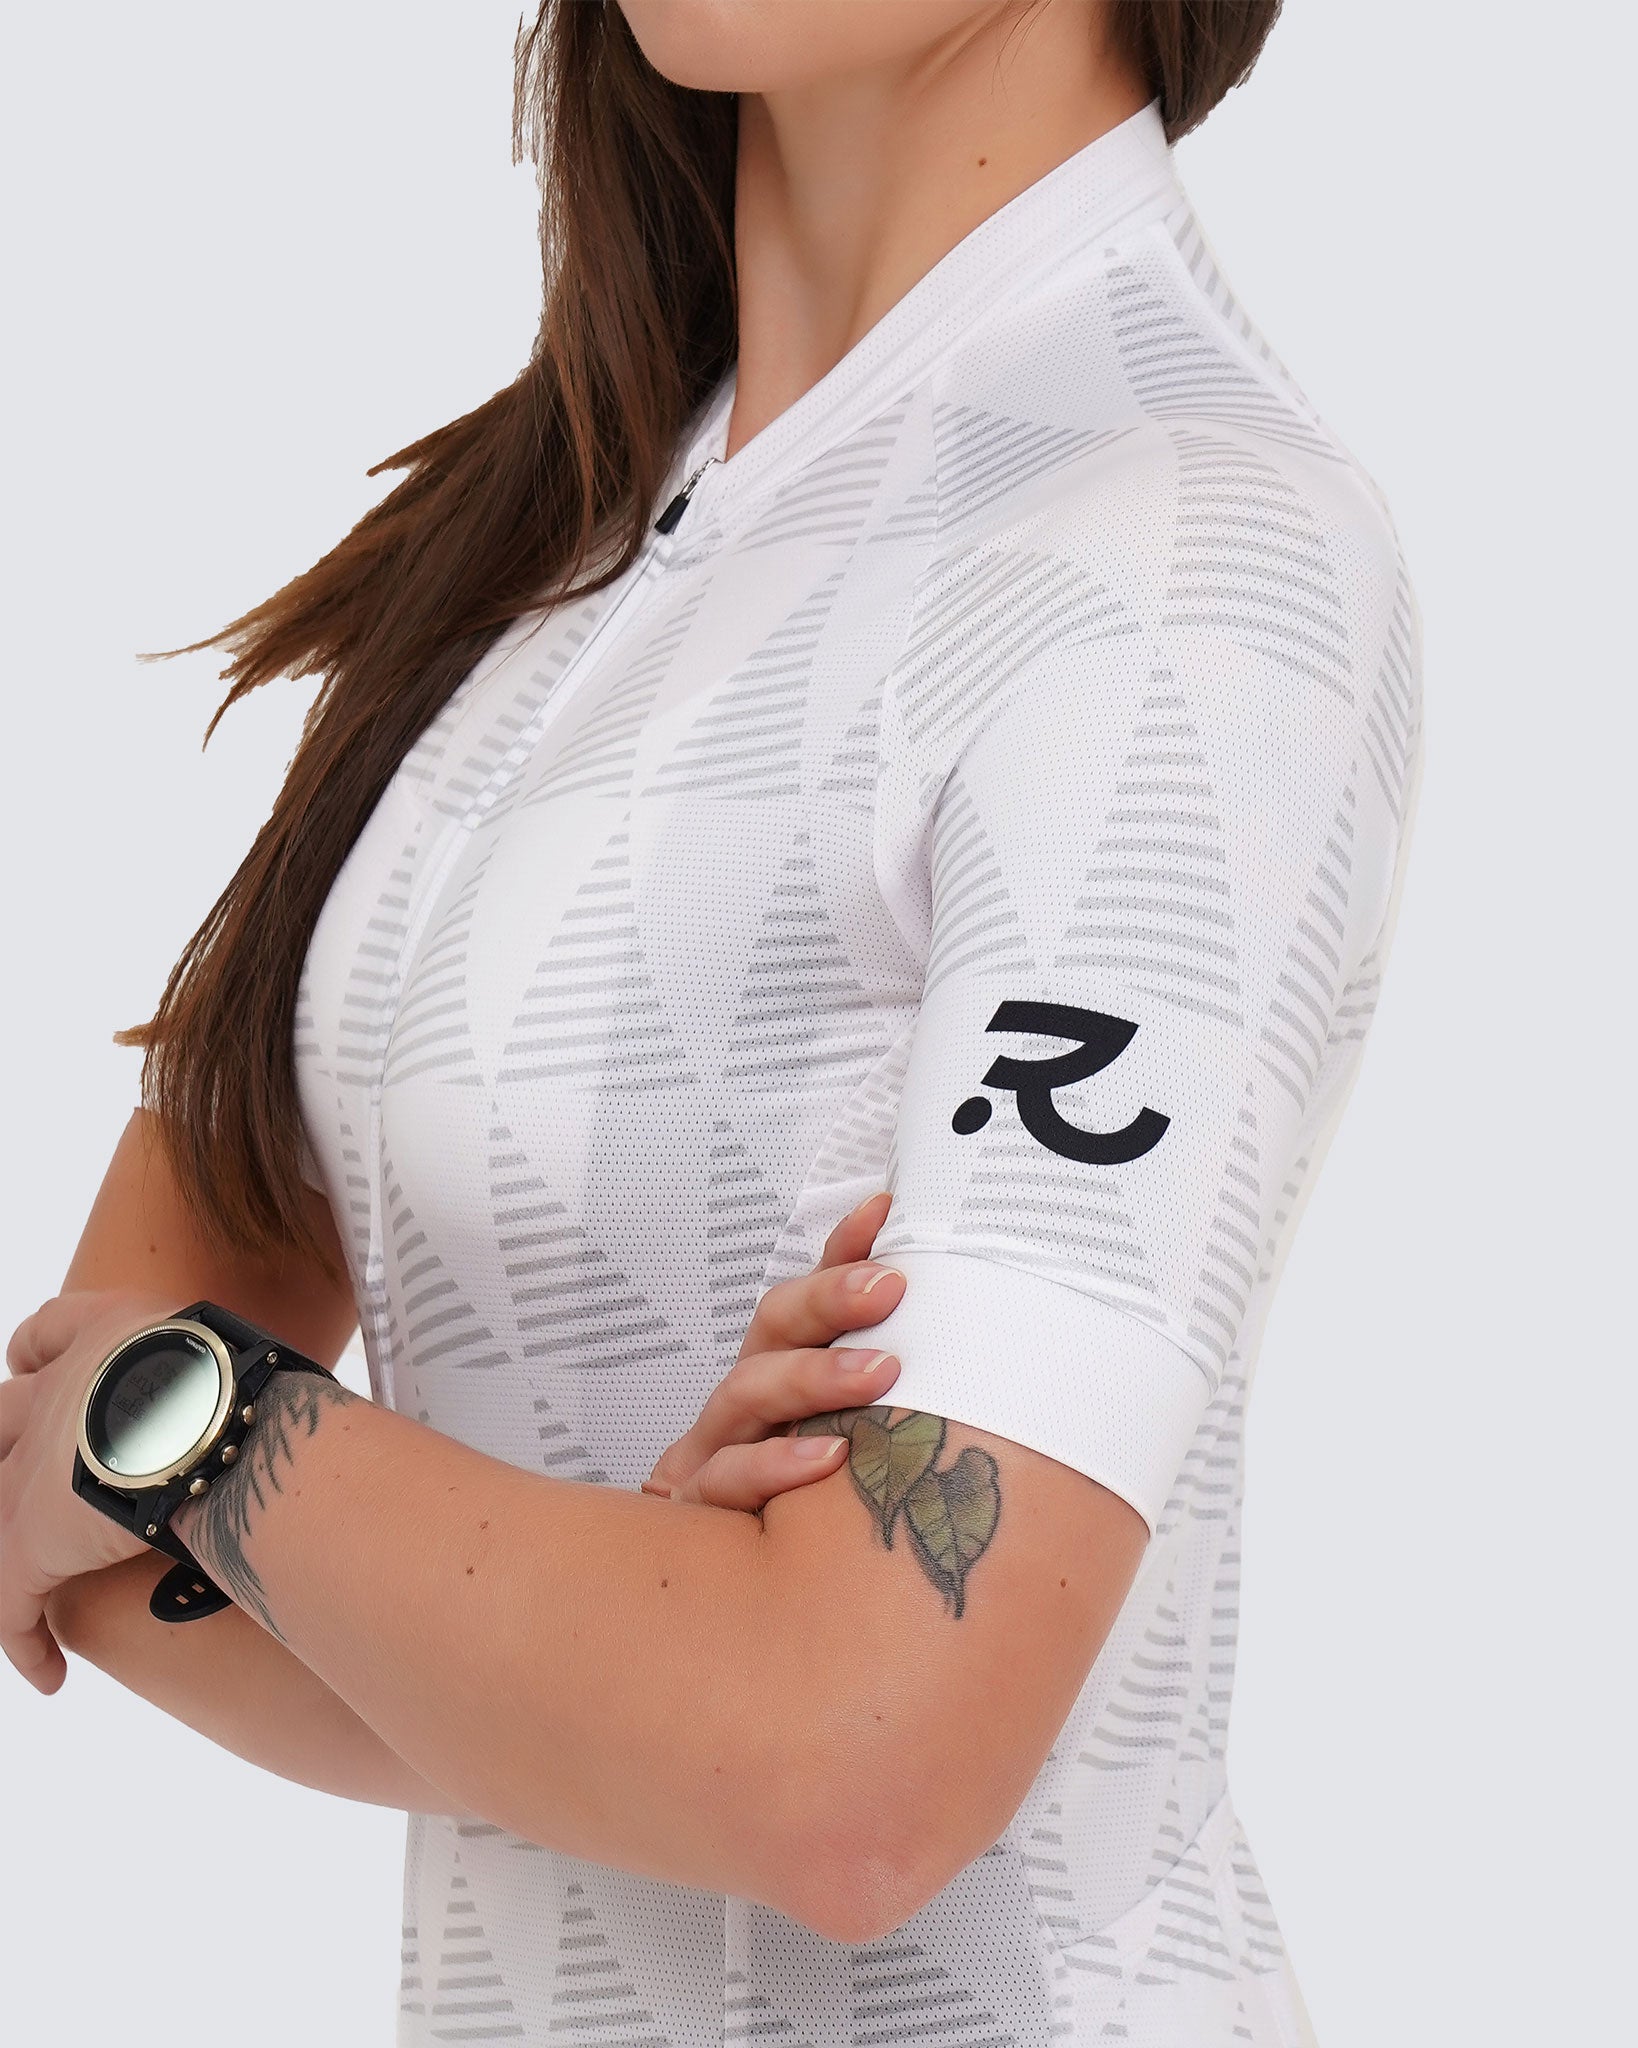 classy white jersey sleeve close up